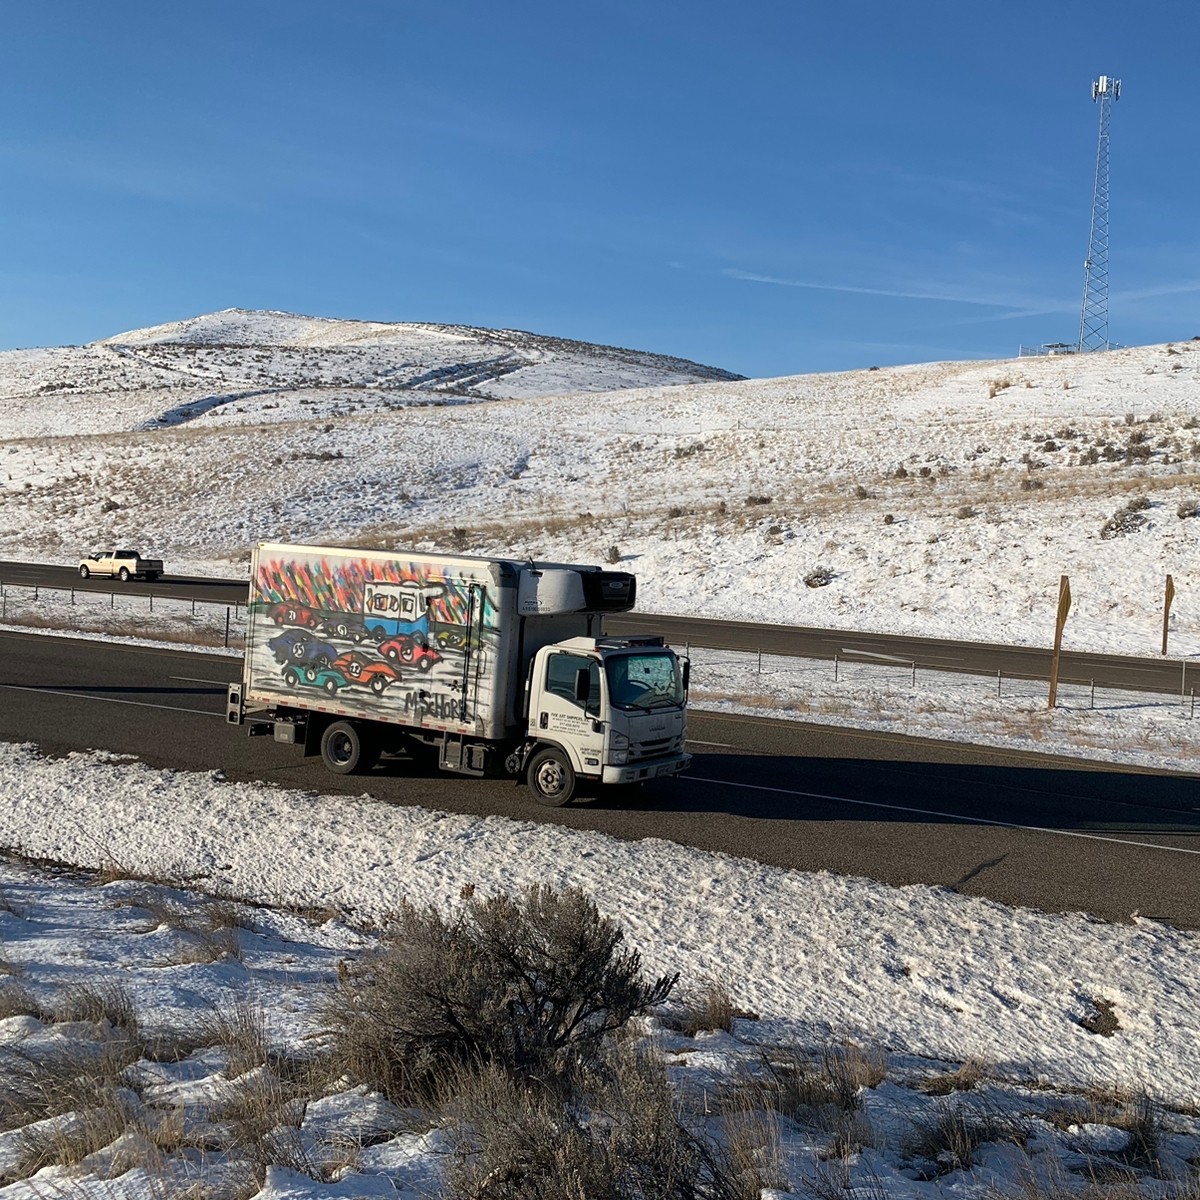 Art Trucks Painted by Mitchell Schorr Travel Across the US